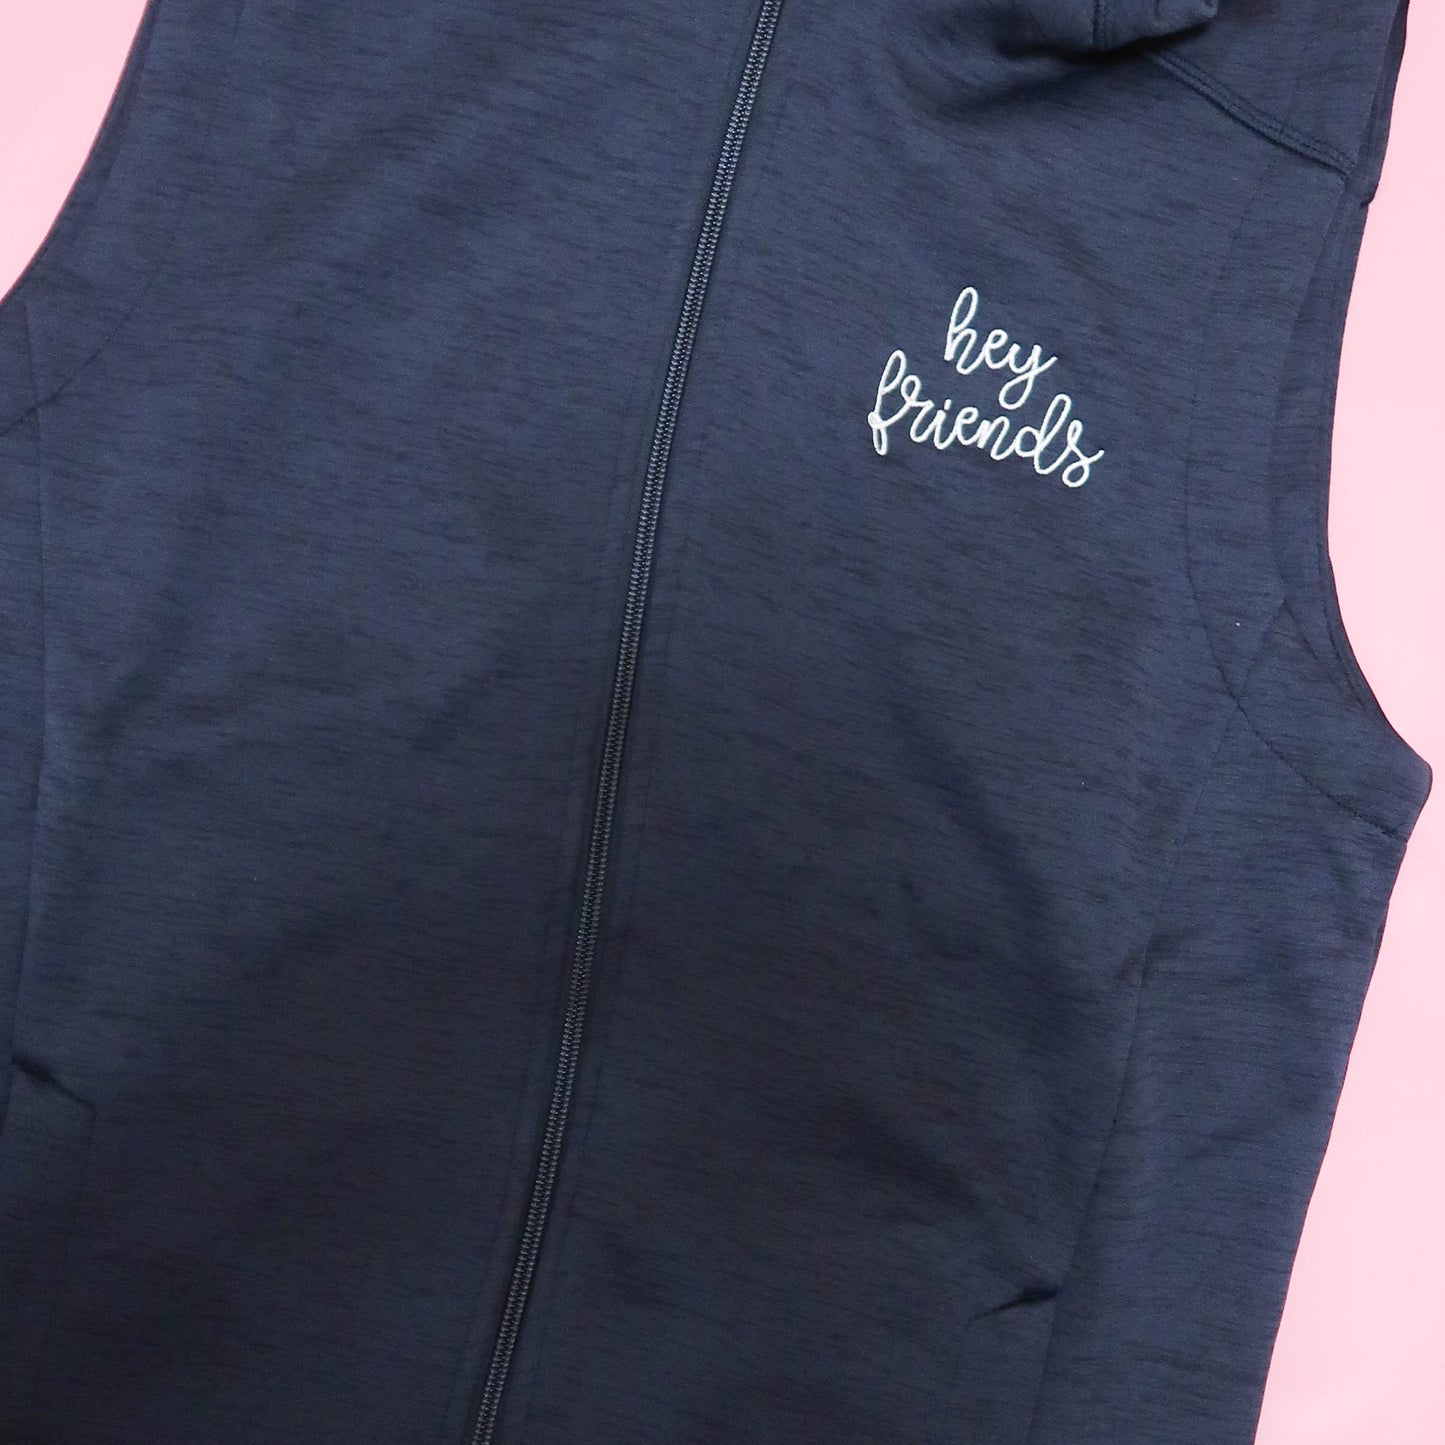 Hey Friends Embroidered Vest